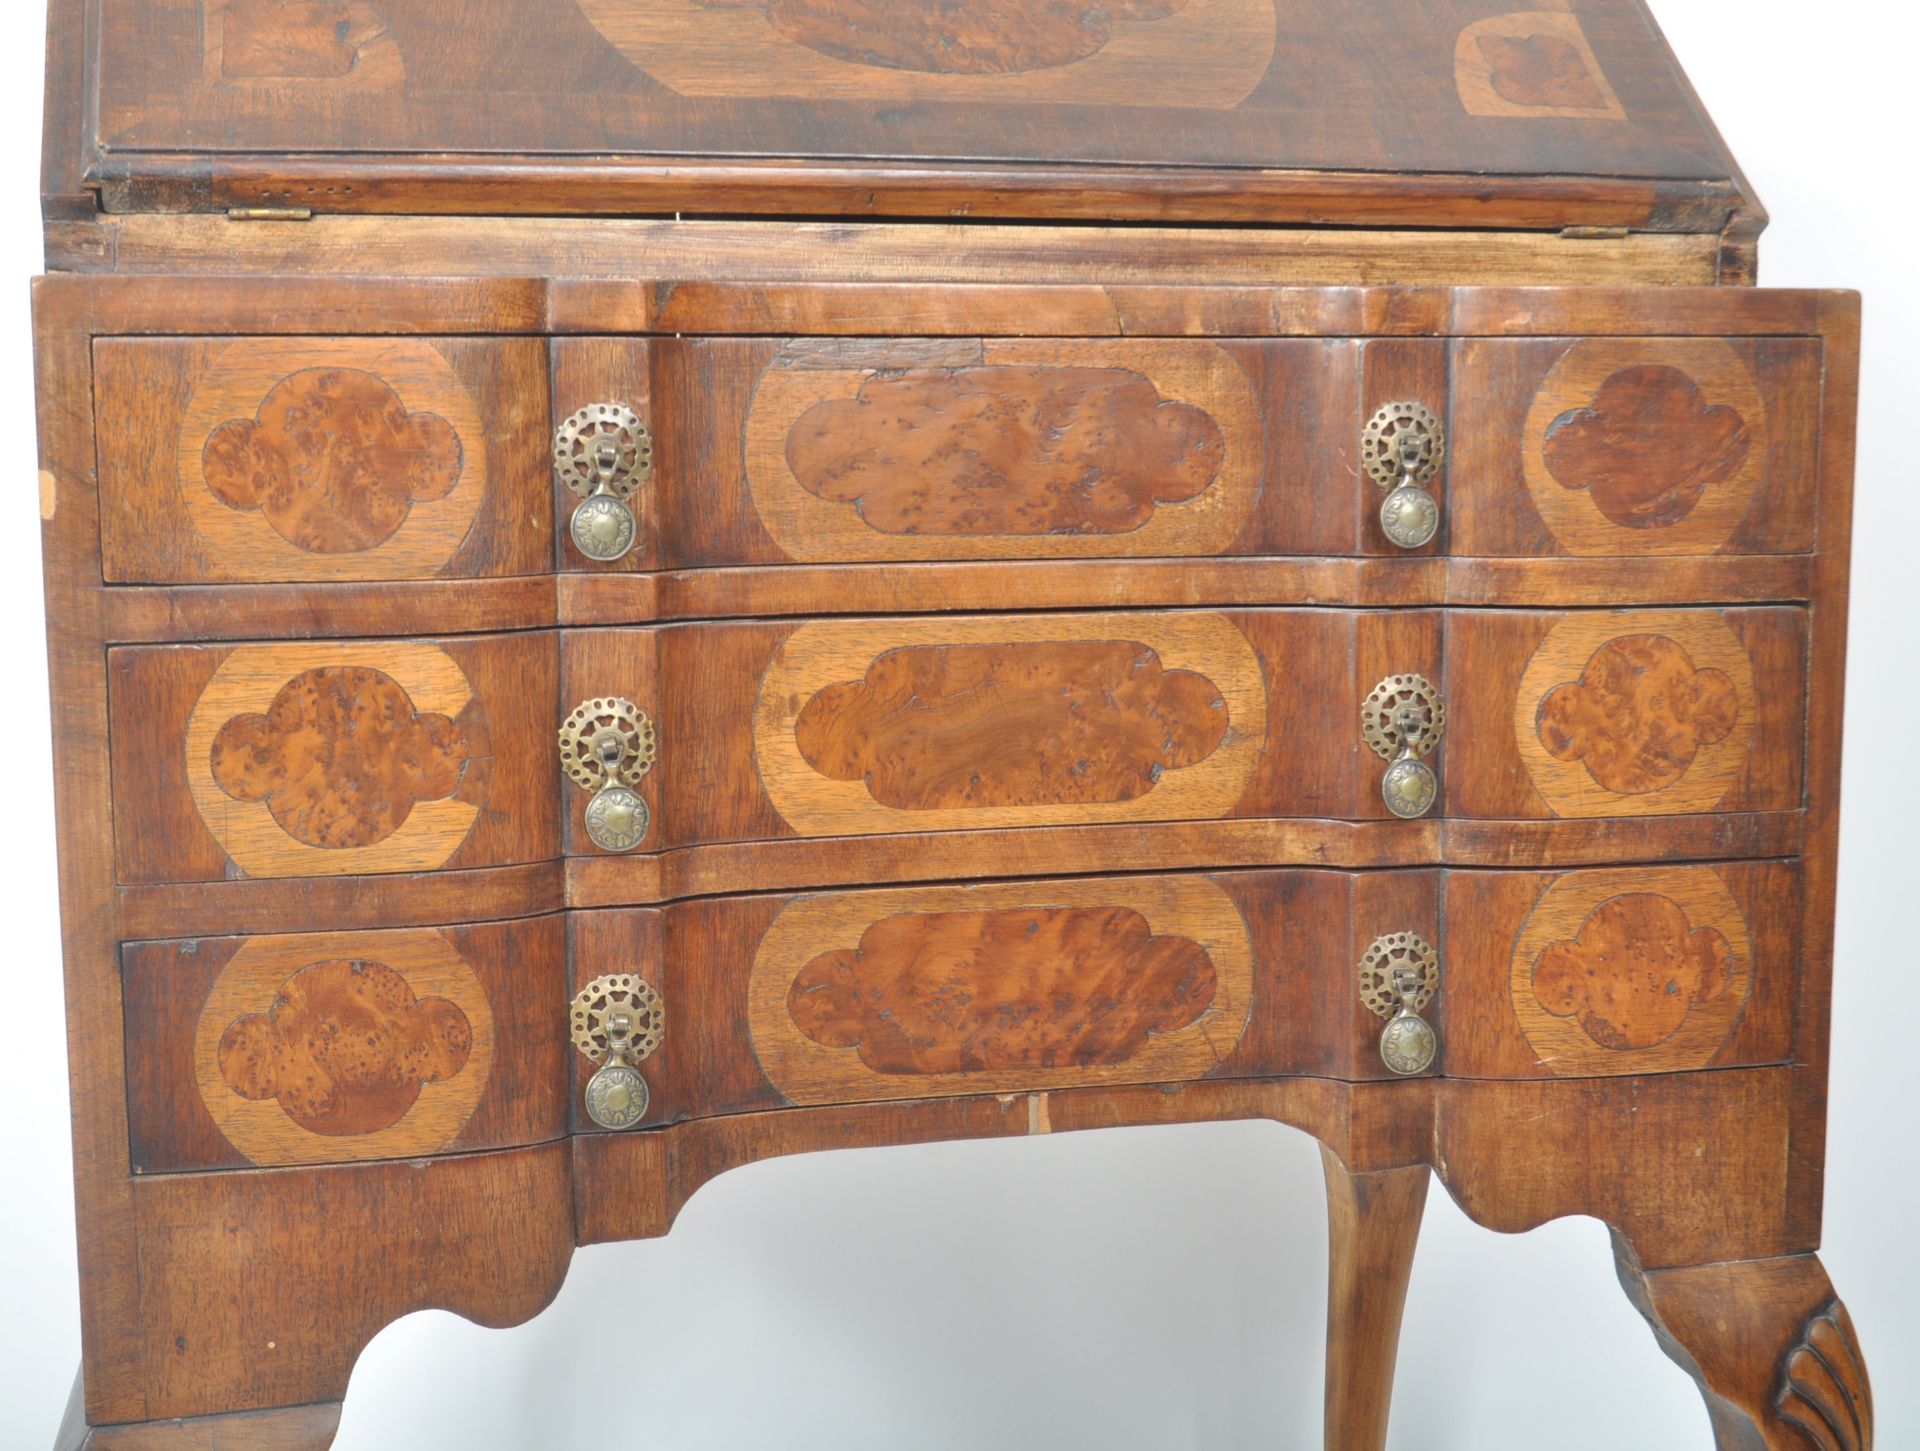 EARLY 20TH CENTURY QUEEN ANNE STYLE WALNUT BUREAU - Image 7 of 7